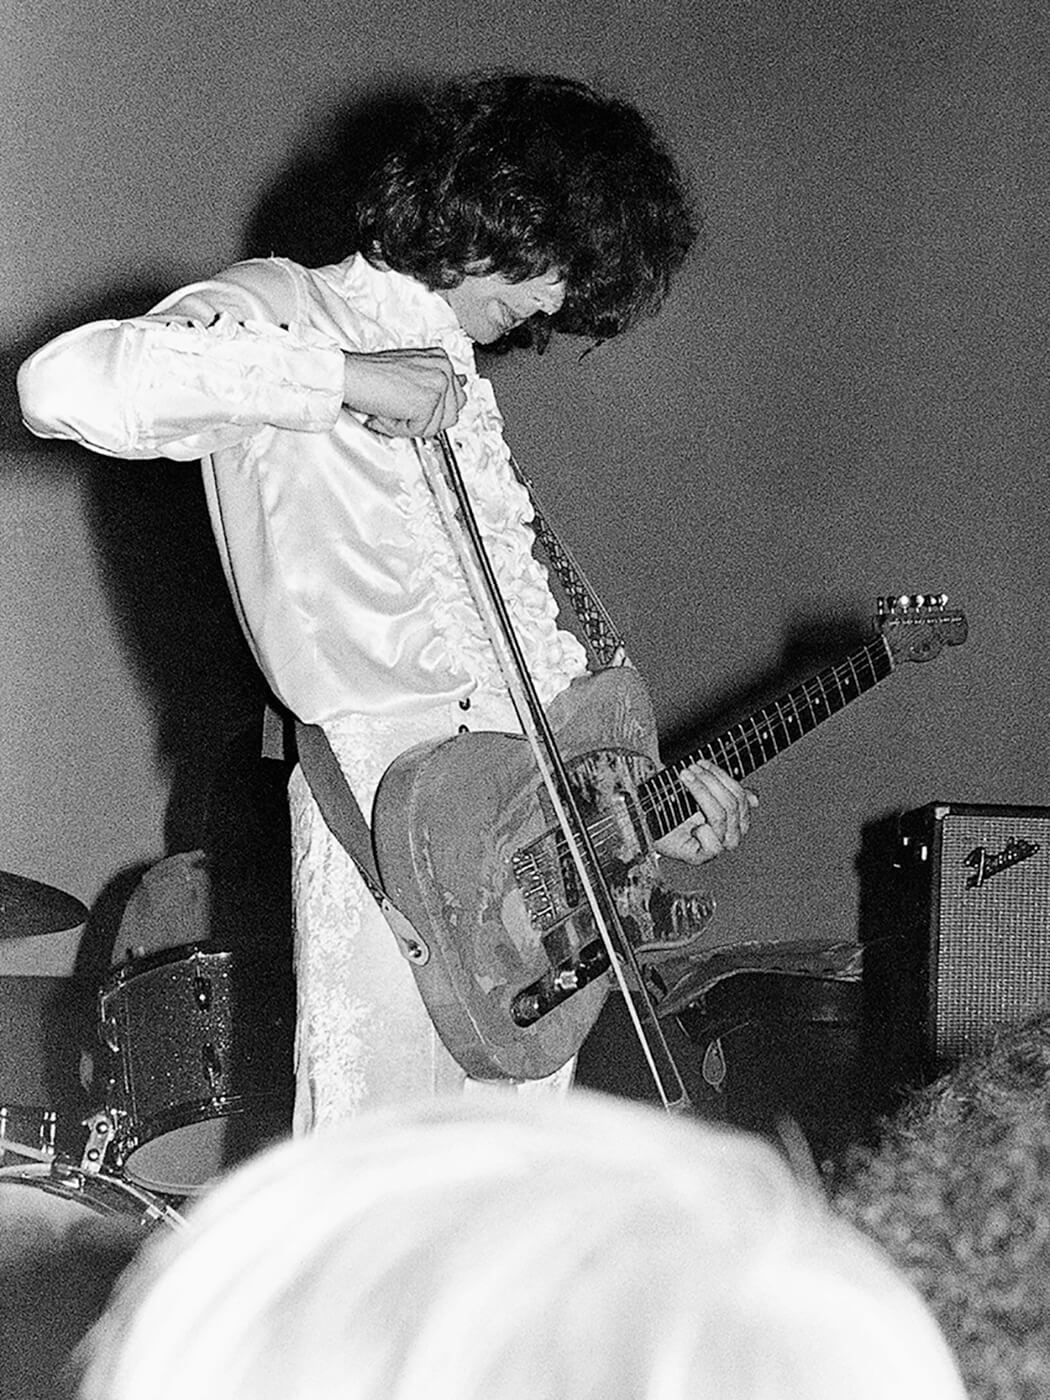 Jimmy Page of The New Yardbirds (soon to be re-named Led Zeppelin) plays his Dragon Telecaster with a violin bow in 1968